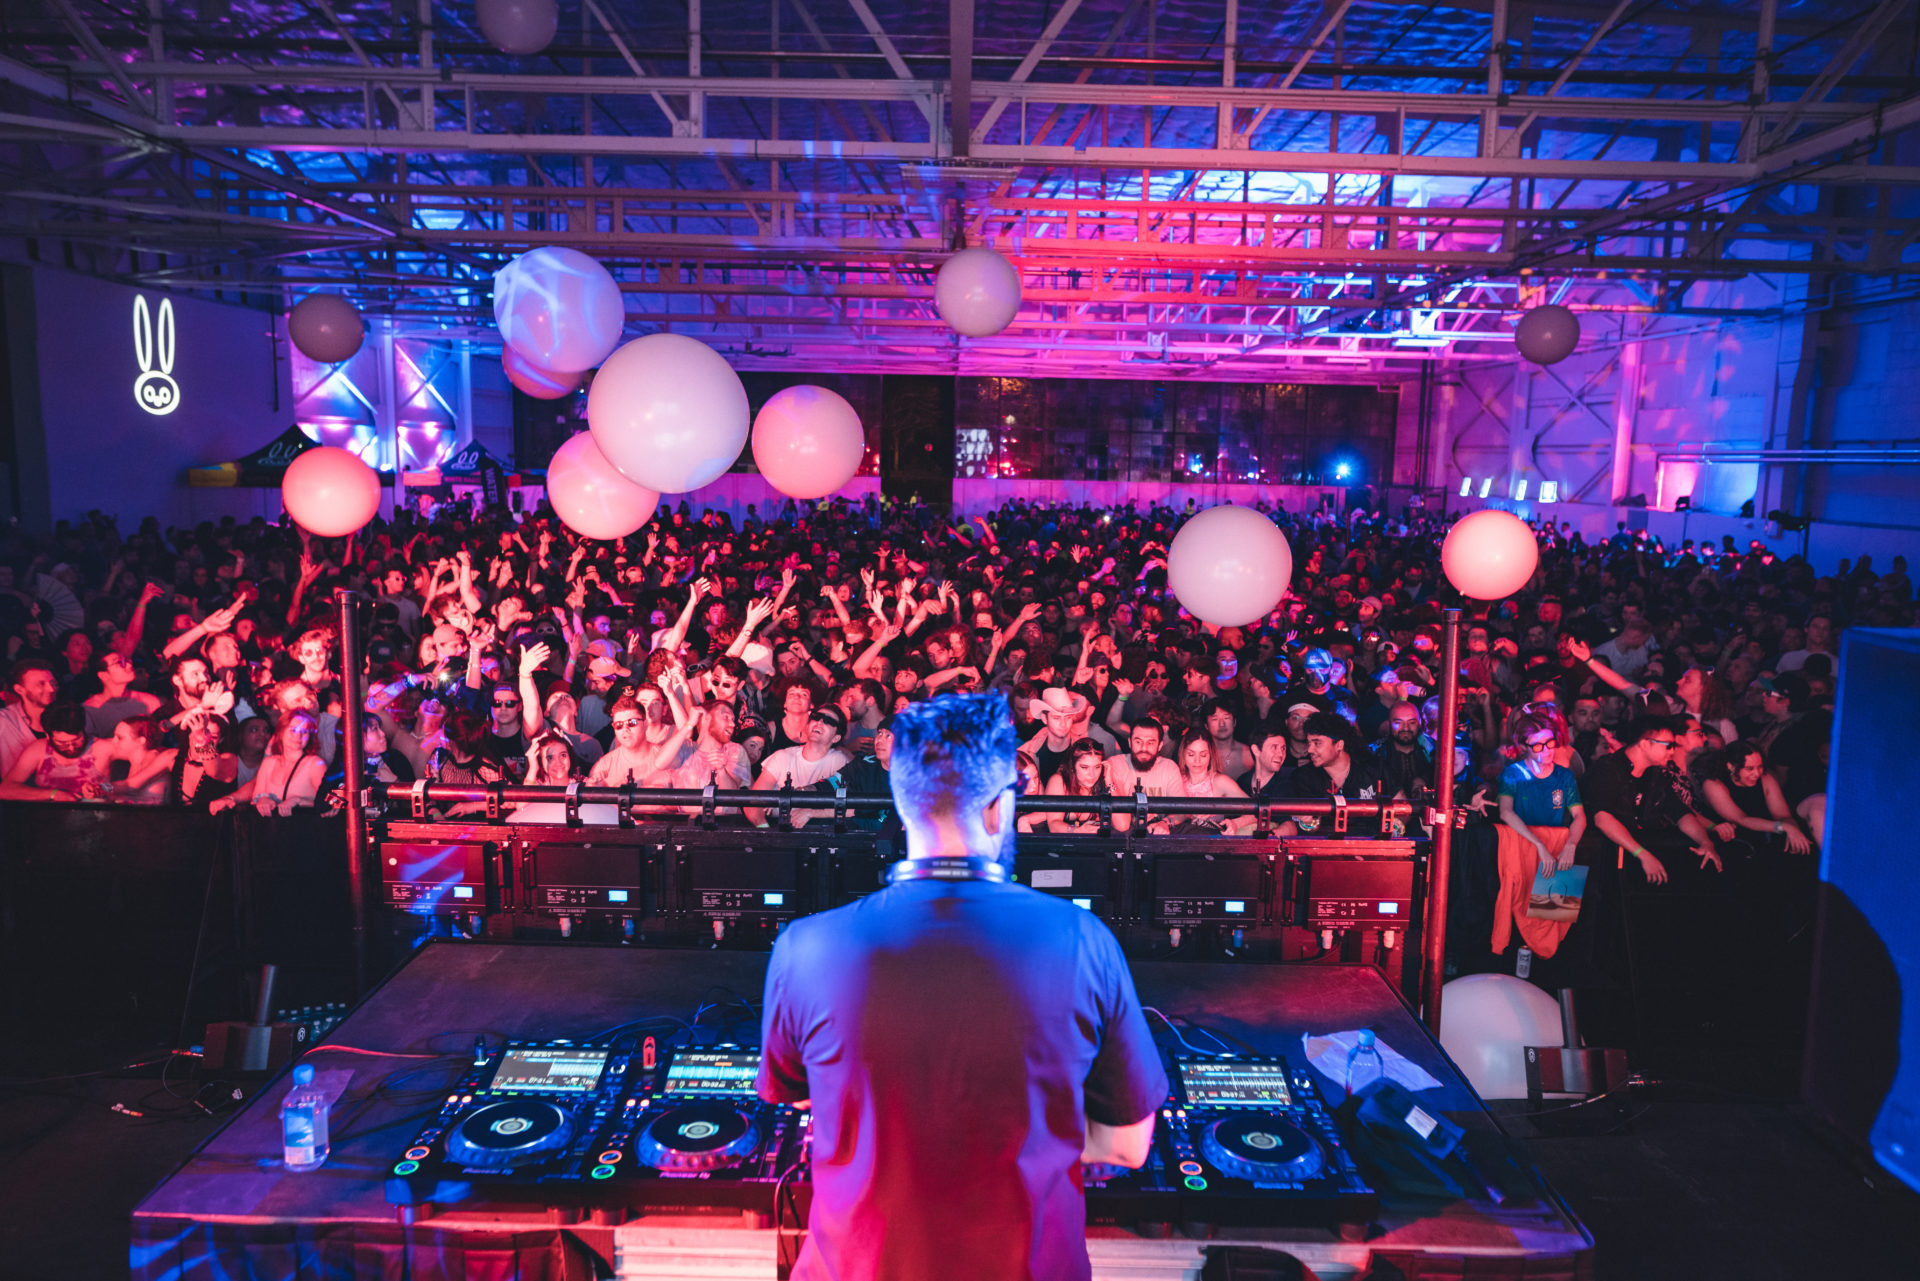 Tchami perfroming in a large hangar with white beach balls in the crowd